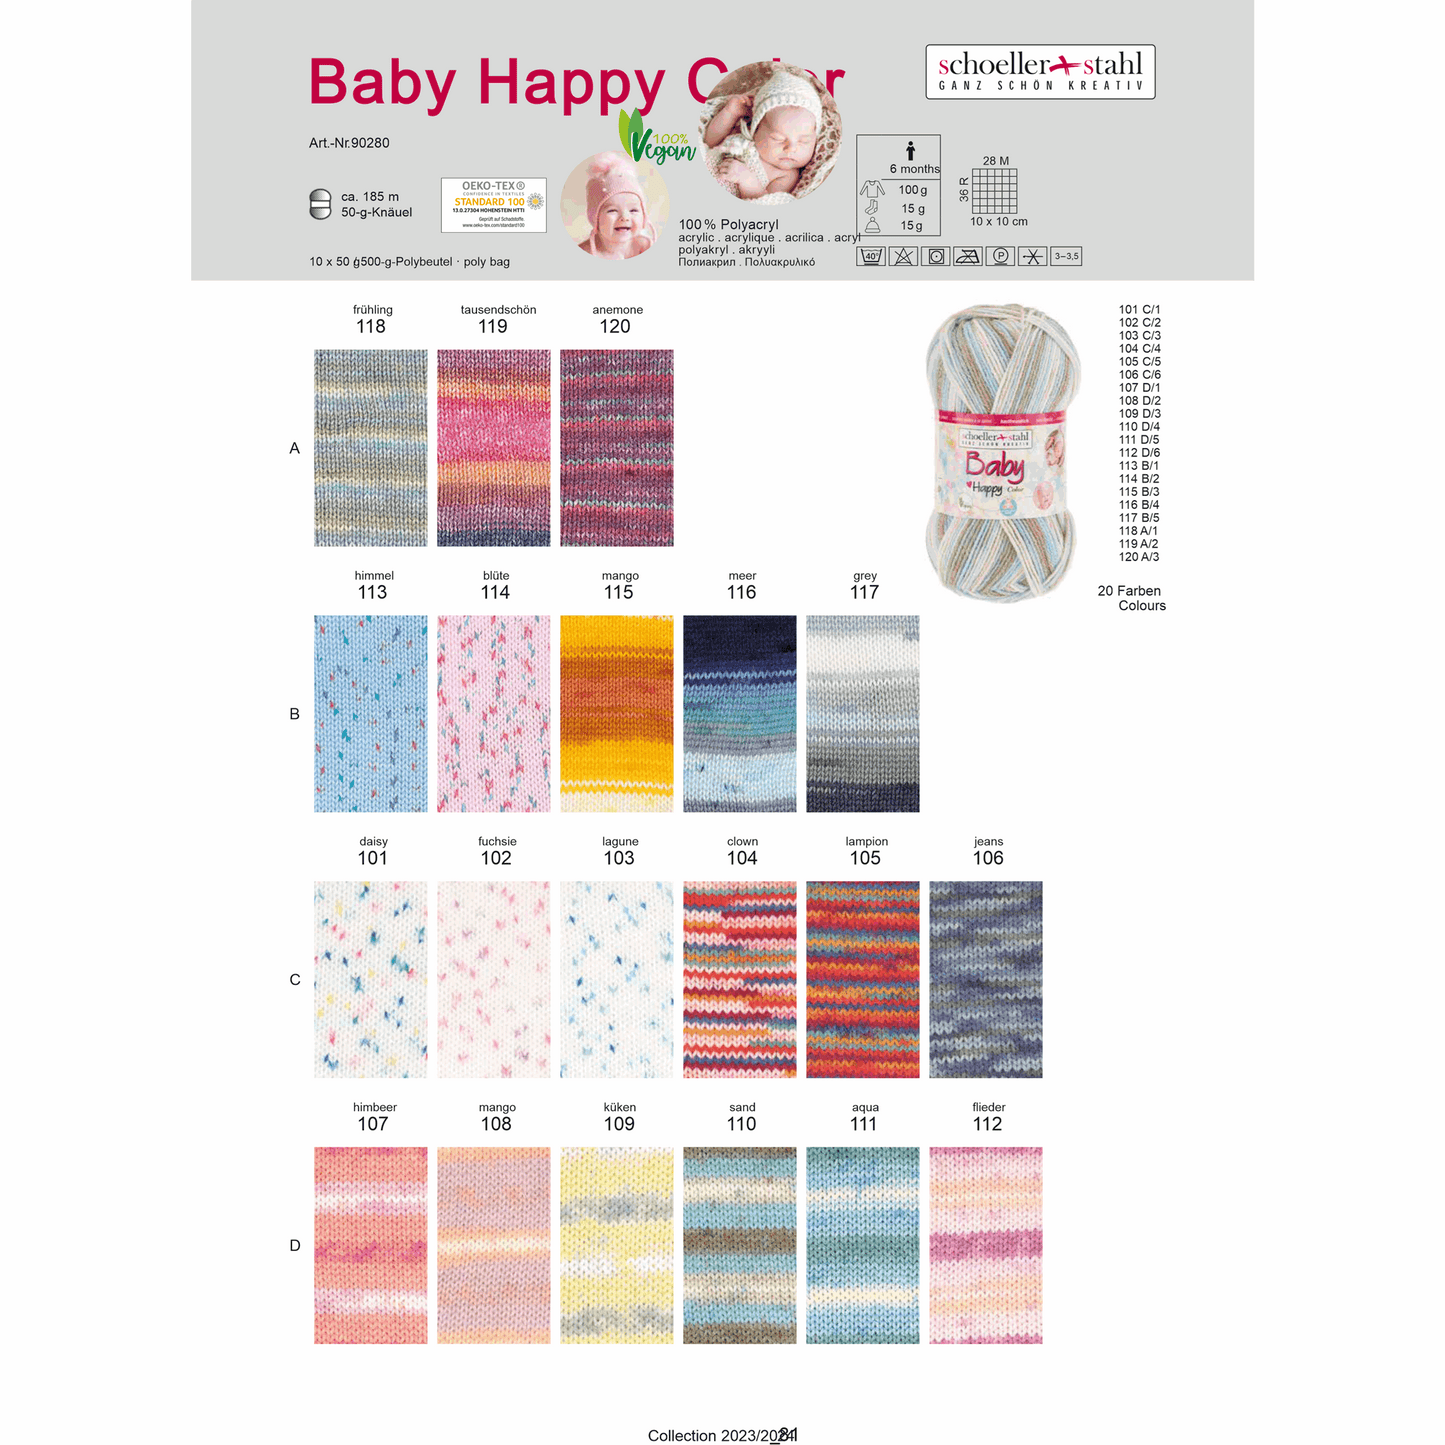 Baby happy color 50g, 90280, Farbe 120, anemone